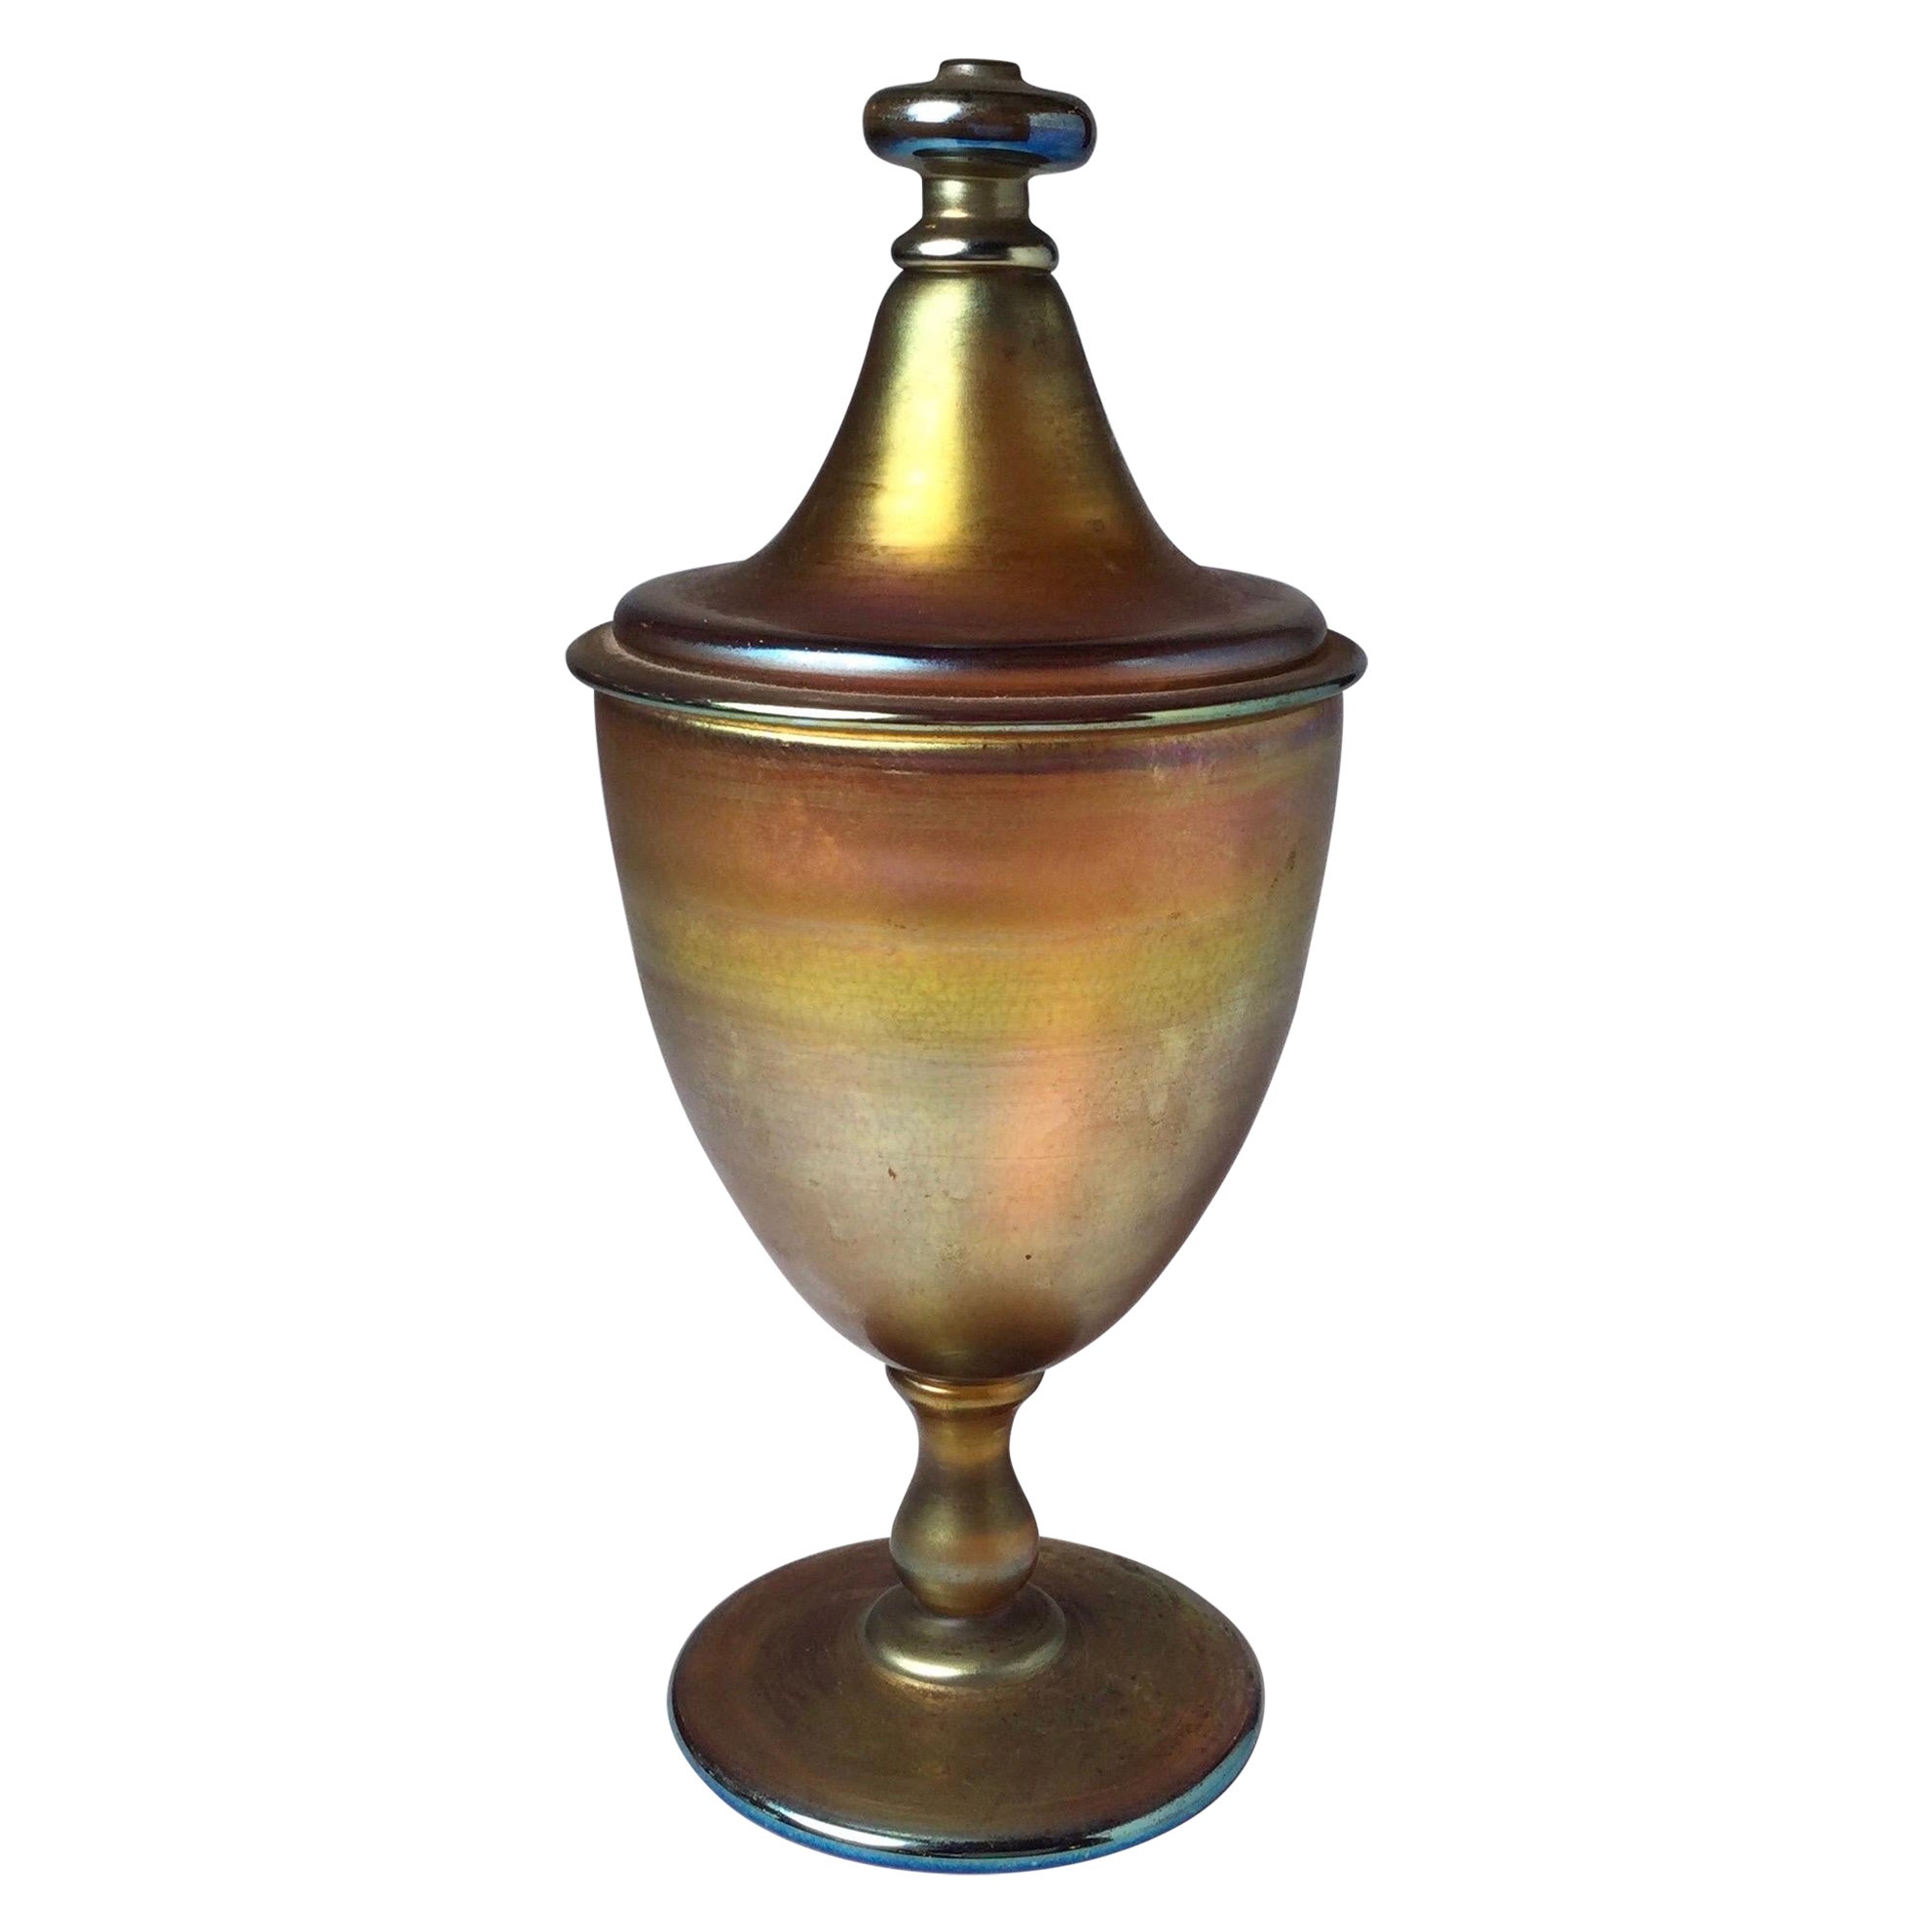 Tiffany Favrile Glass Covered Footed Compote, Louis Comfort Tiffany